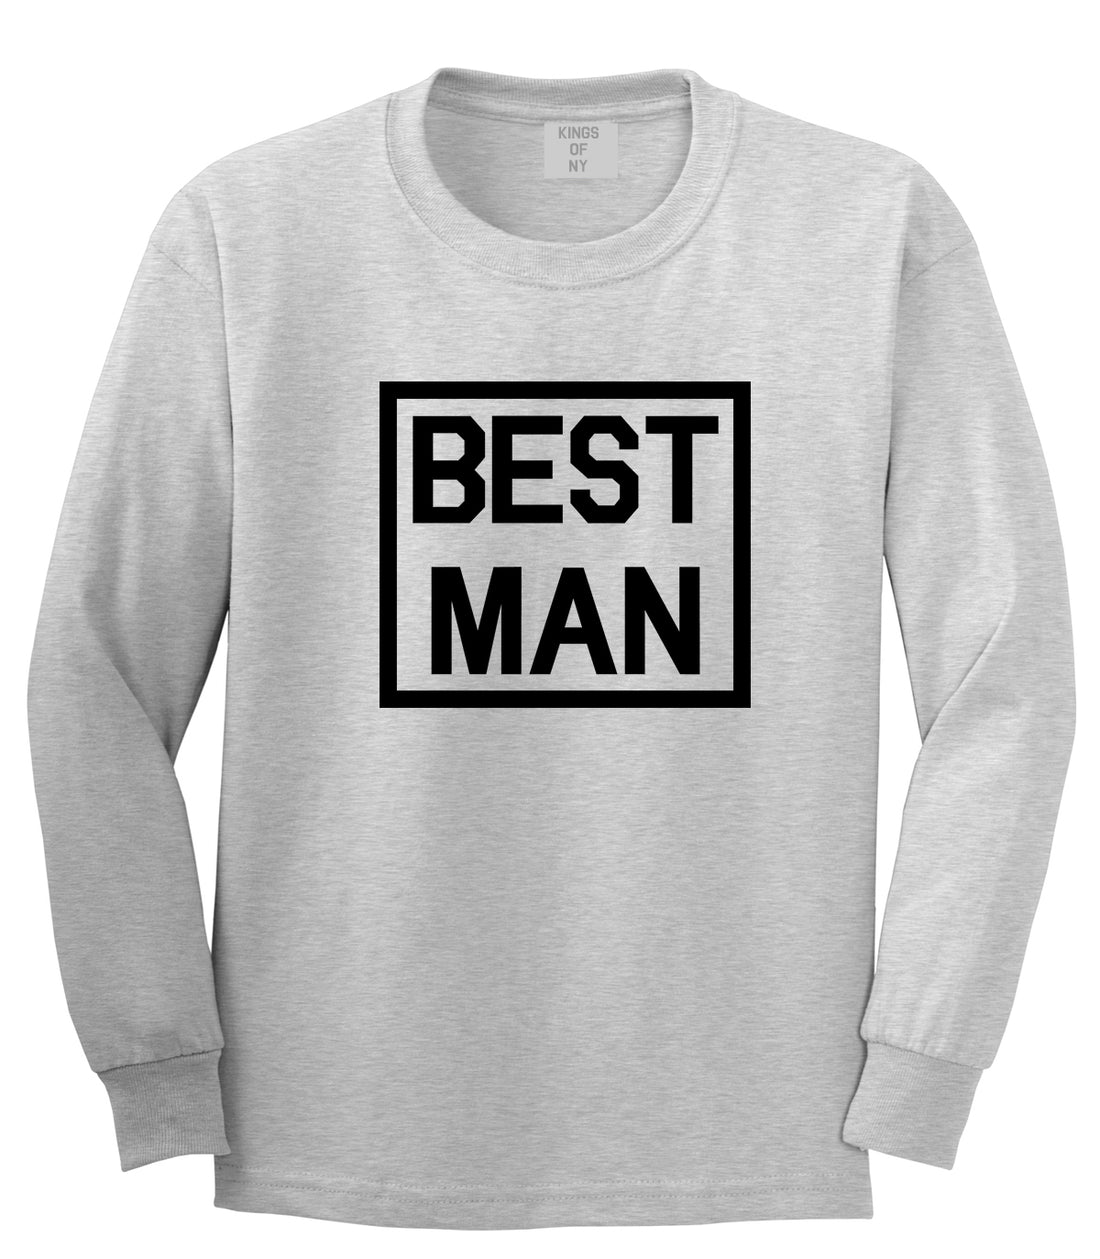 Best Man Bachelor Party Grey Long Sleeve T-Shirt by Kings Of NY